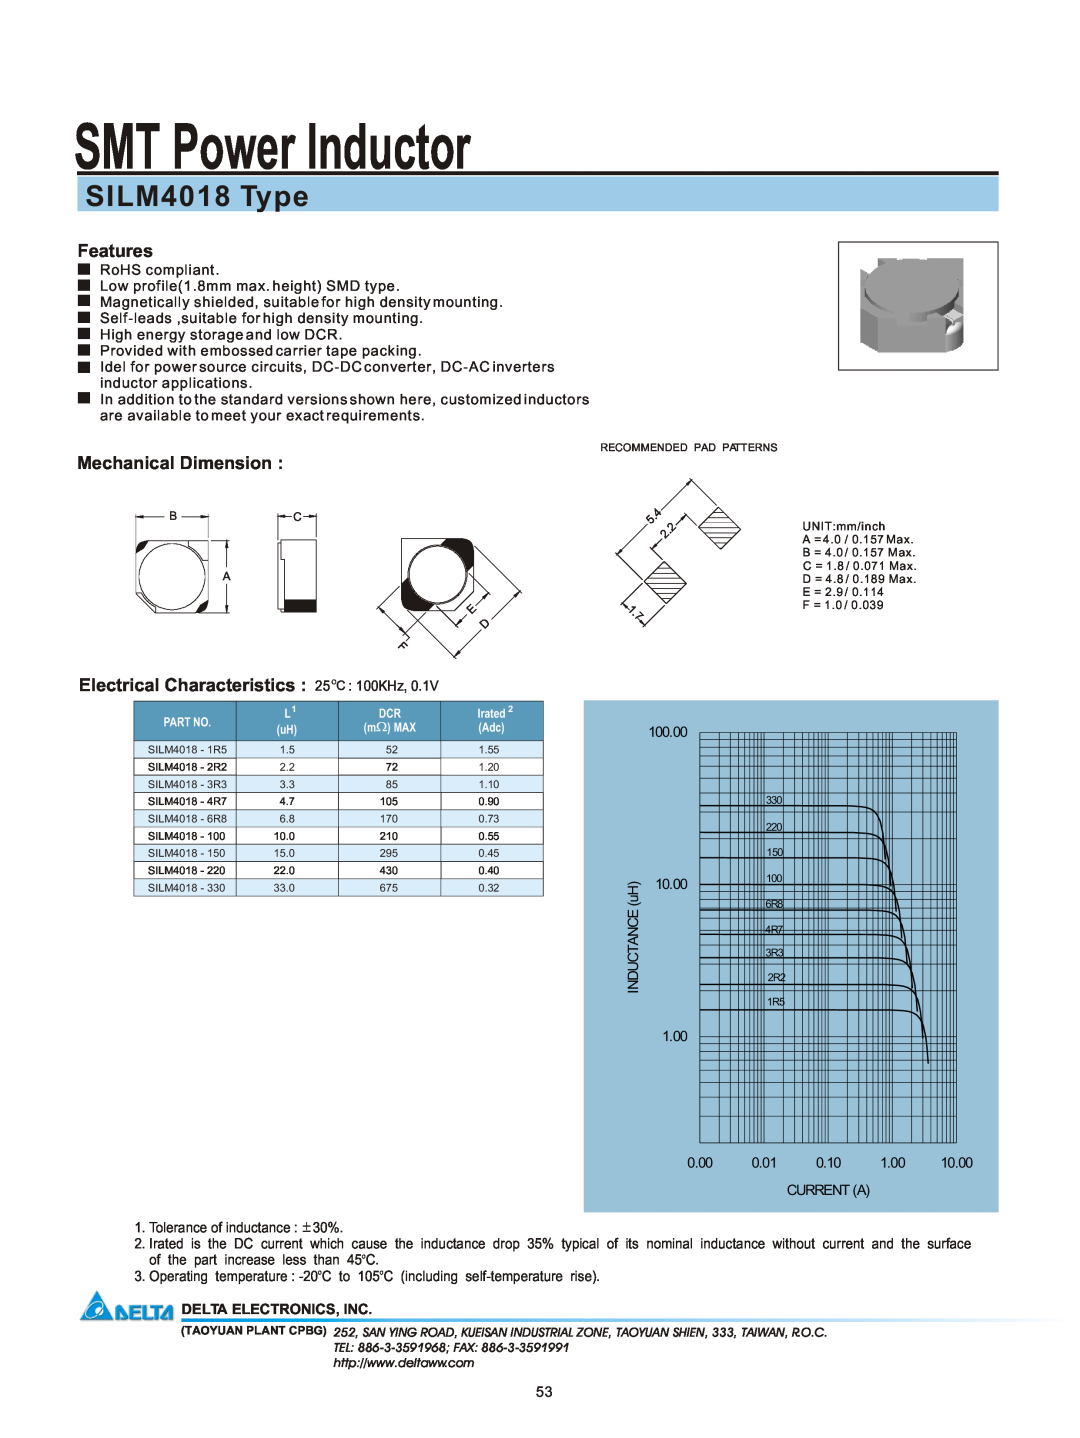 Delta Electronics manual SMT Power Inductor, SILM4018 Type, Features, Mechanical Dimension, Delta Electronics, Inc 